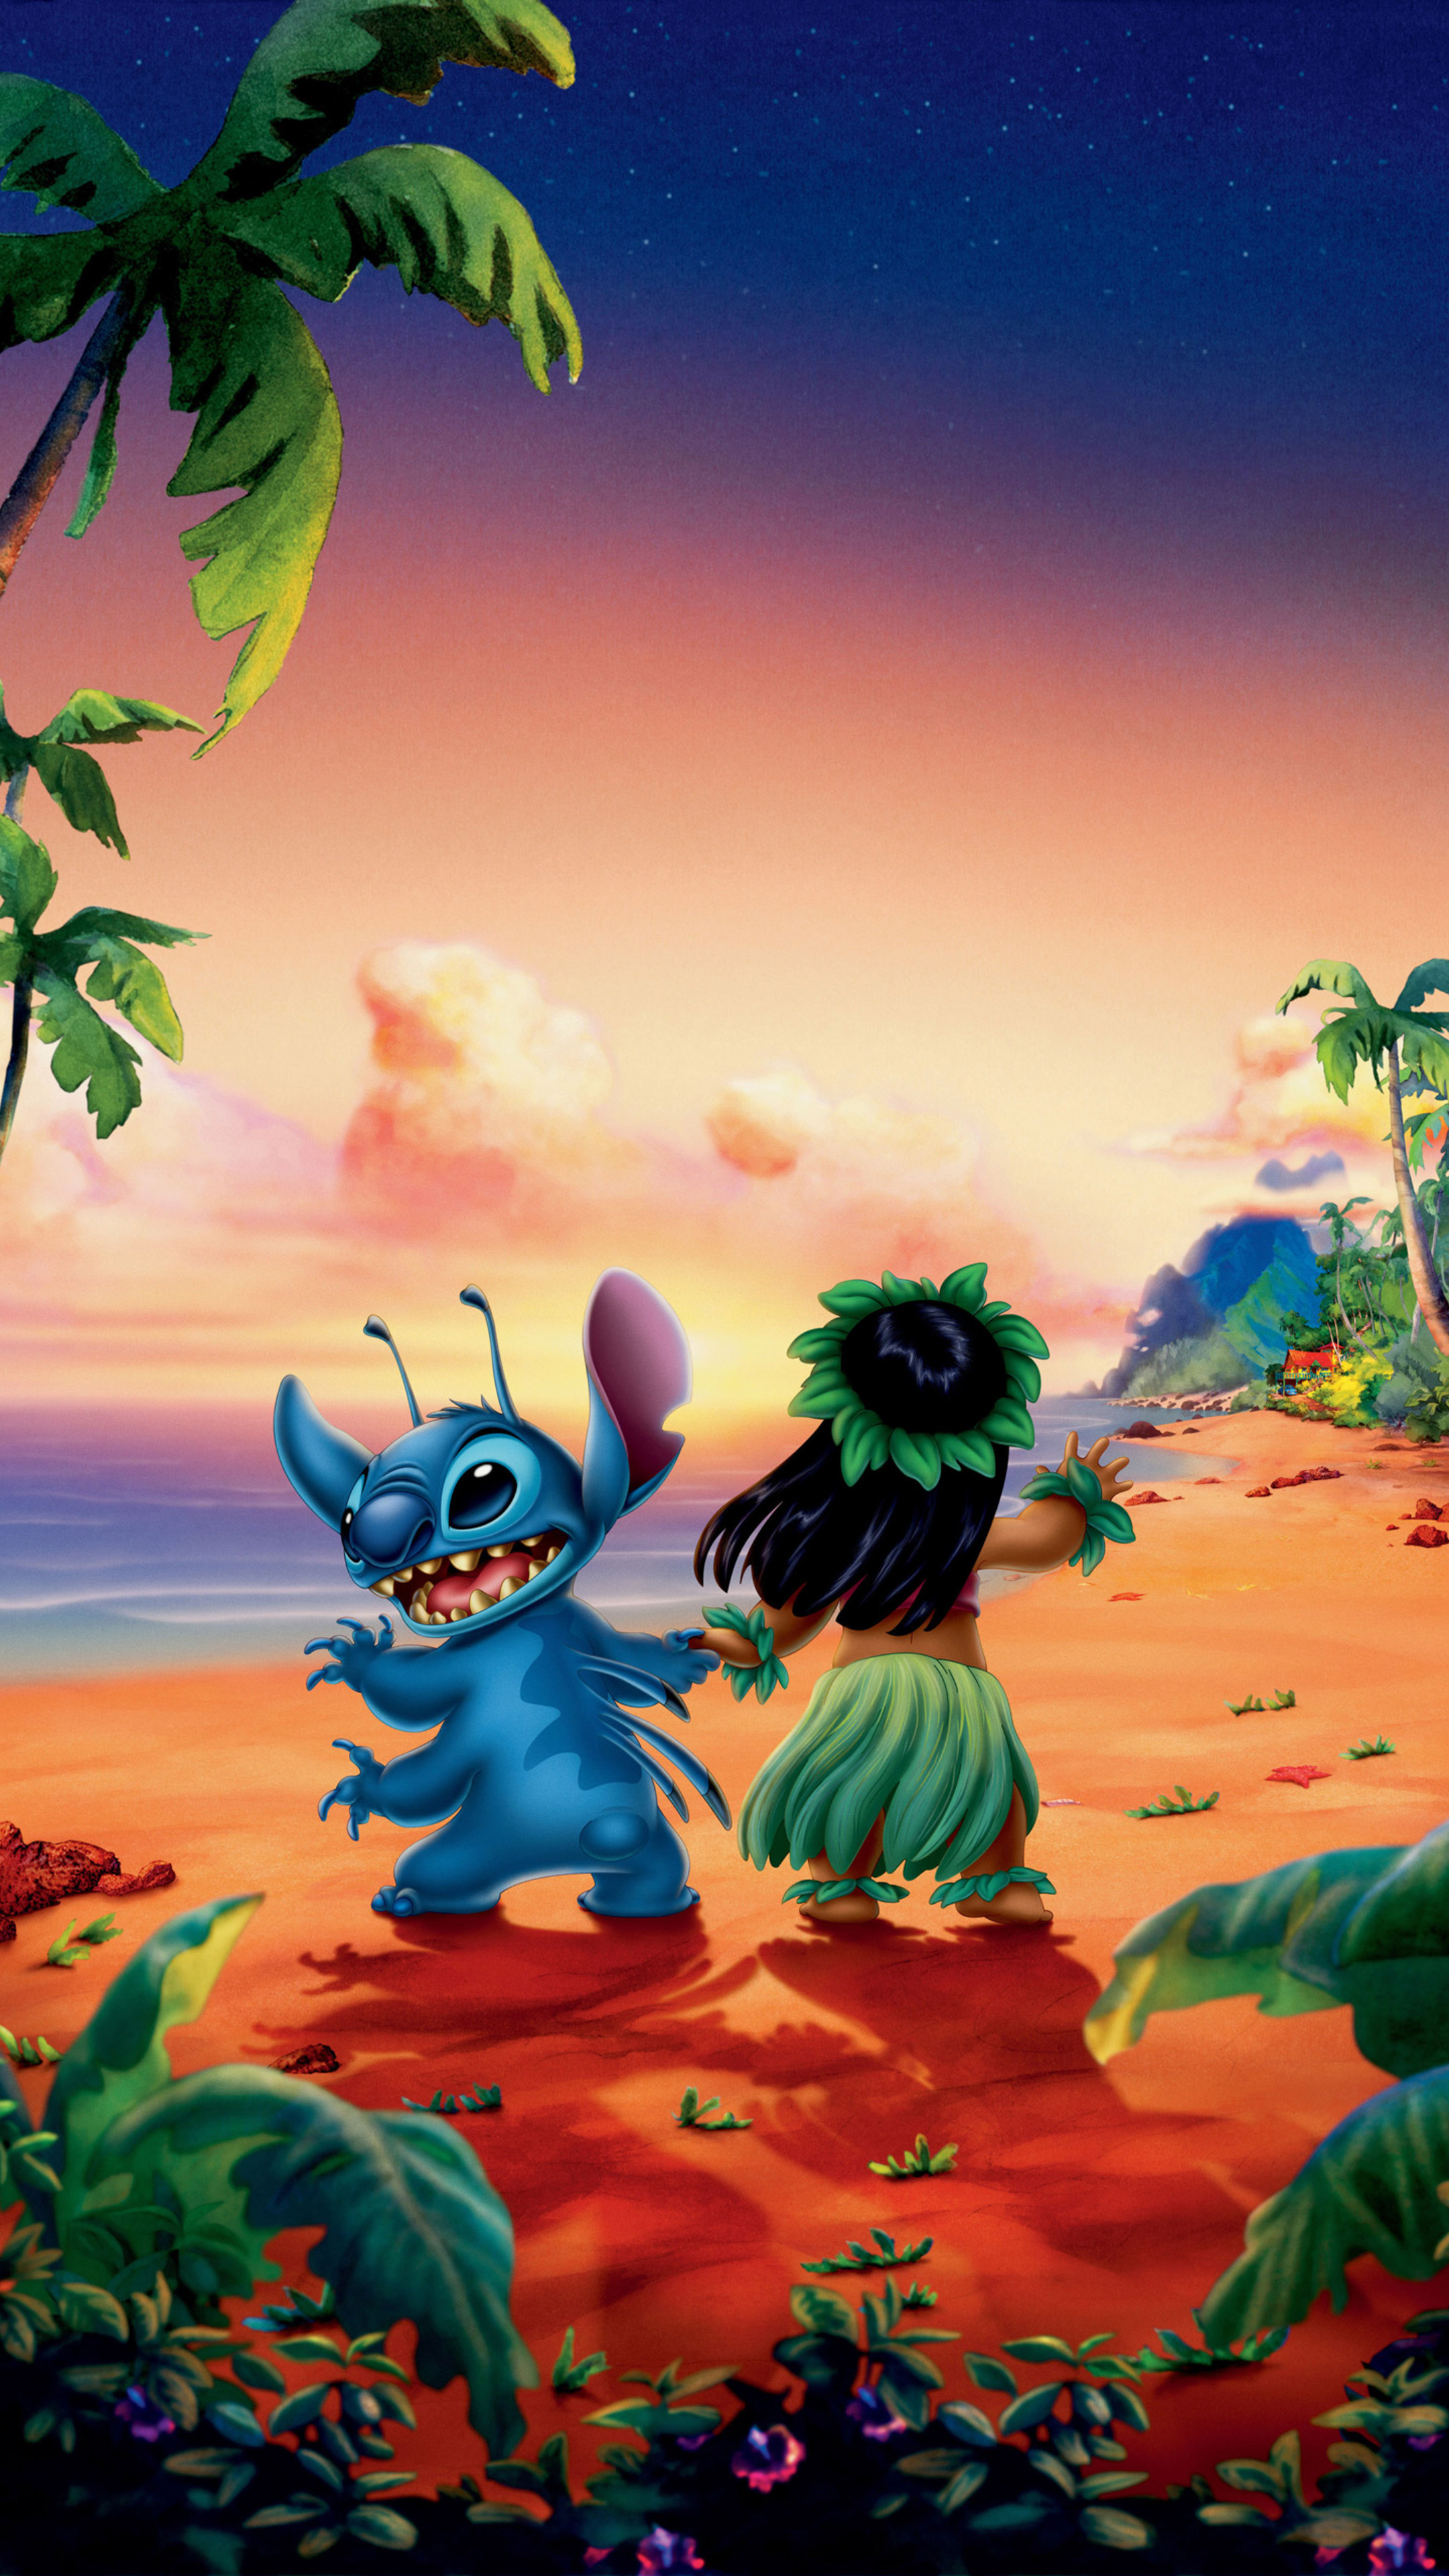 Stitch animation, Lilo and Stitch Sony Xperia wallpapers, HD 4K wallpapers, Photos, 2160x3840 4K Phone